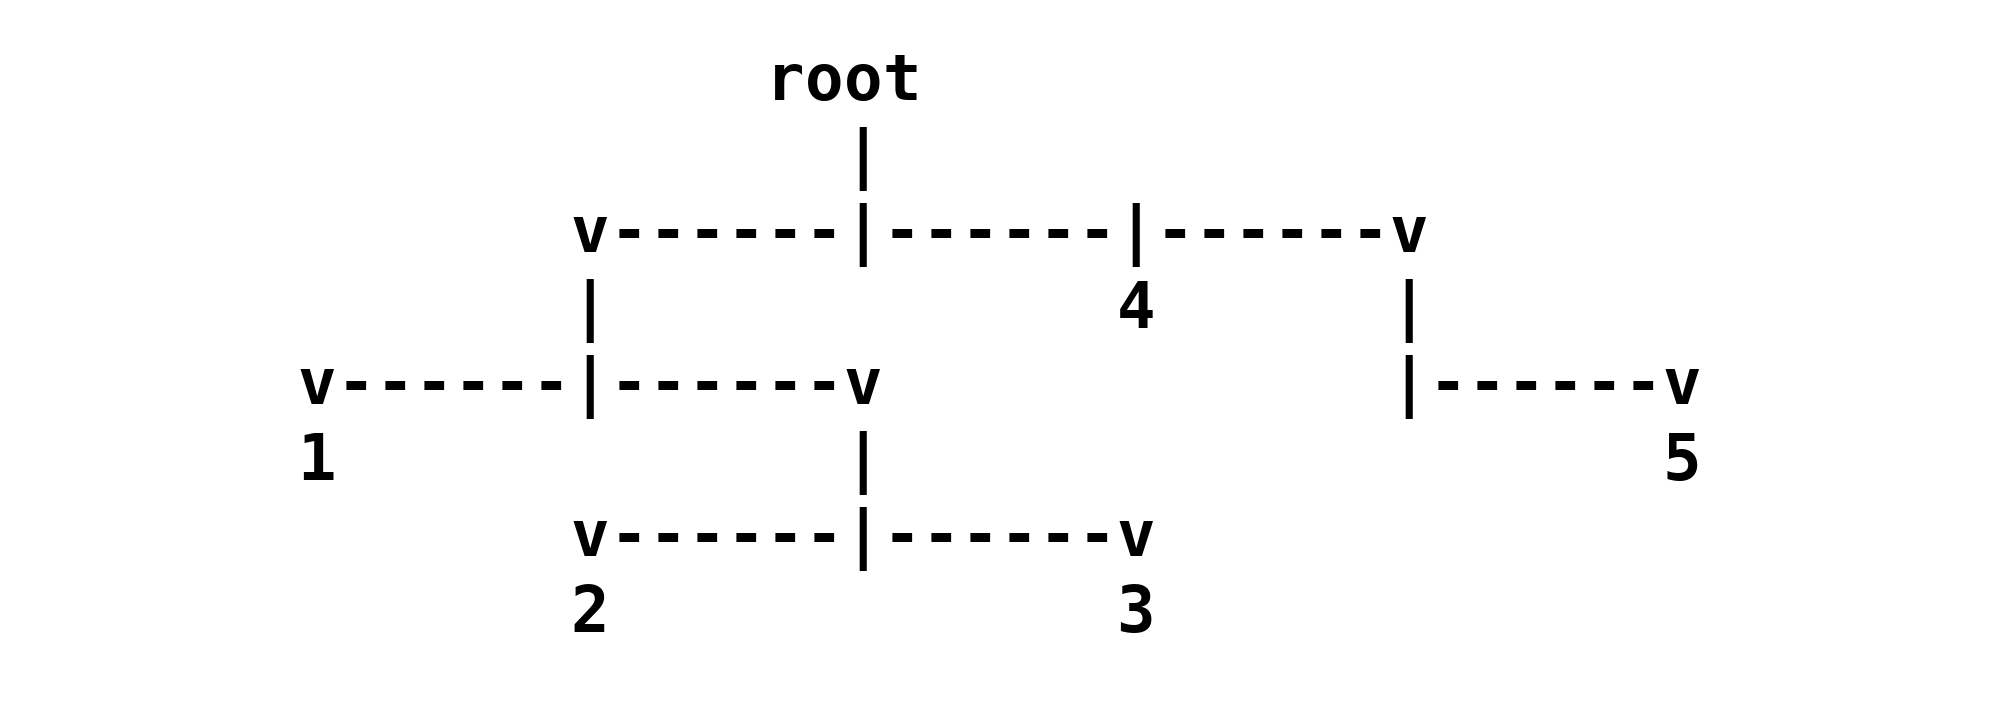 An ASCII art representation of the nested list in this article